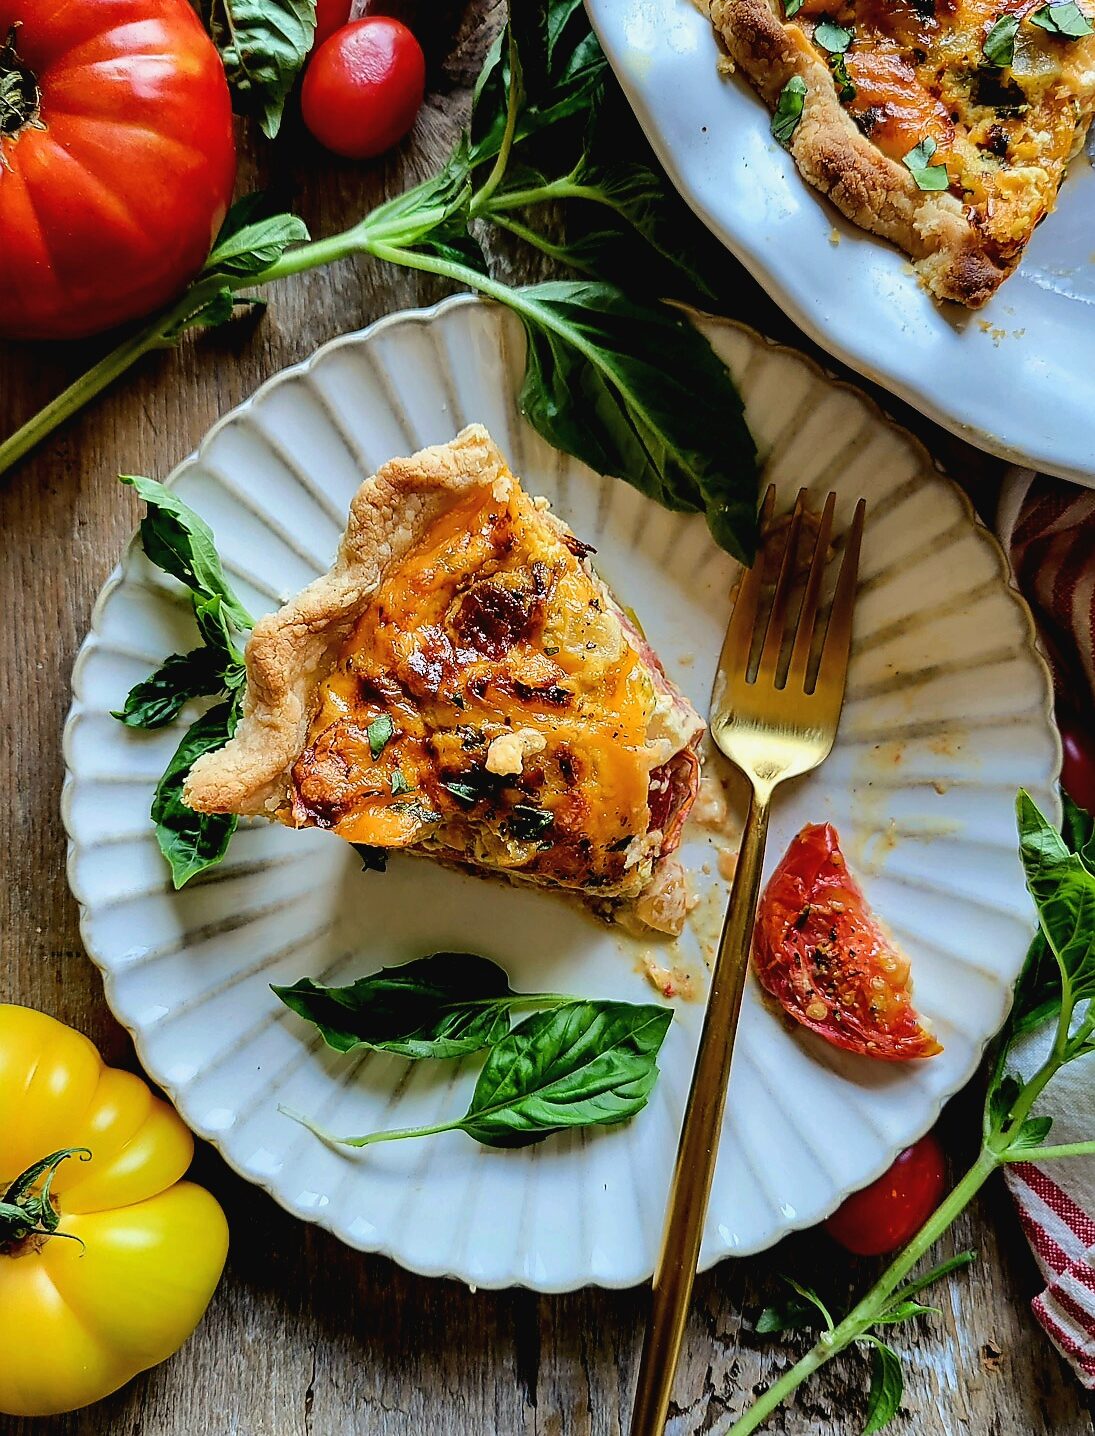 A slice of Cheesy Tomato Pie on a plate, with tomatoes and basil strewn about.